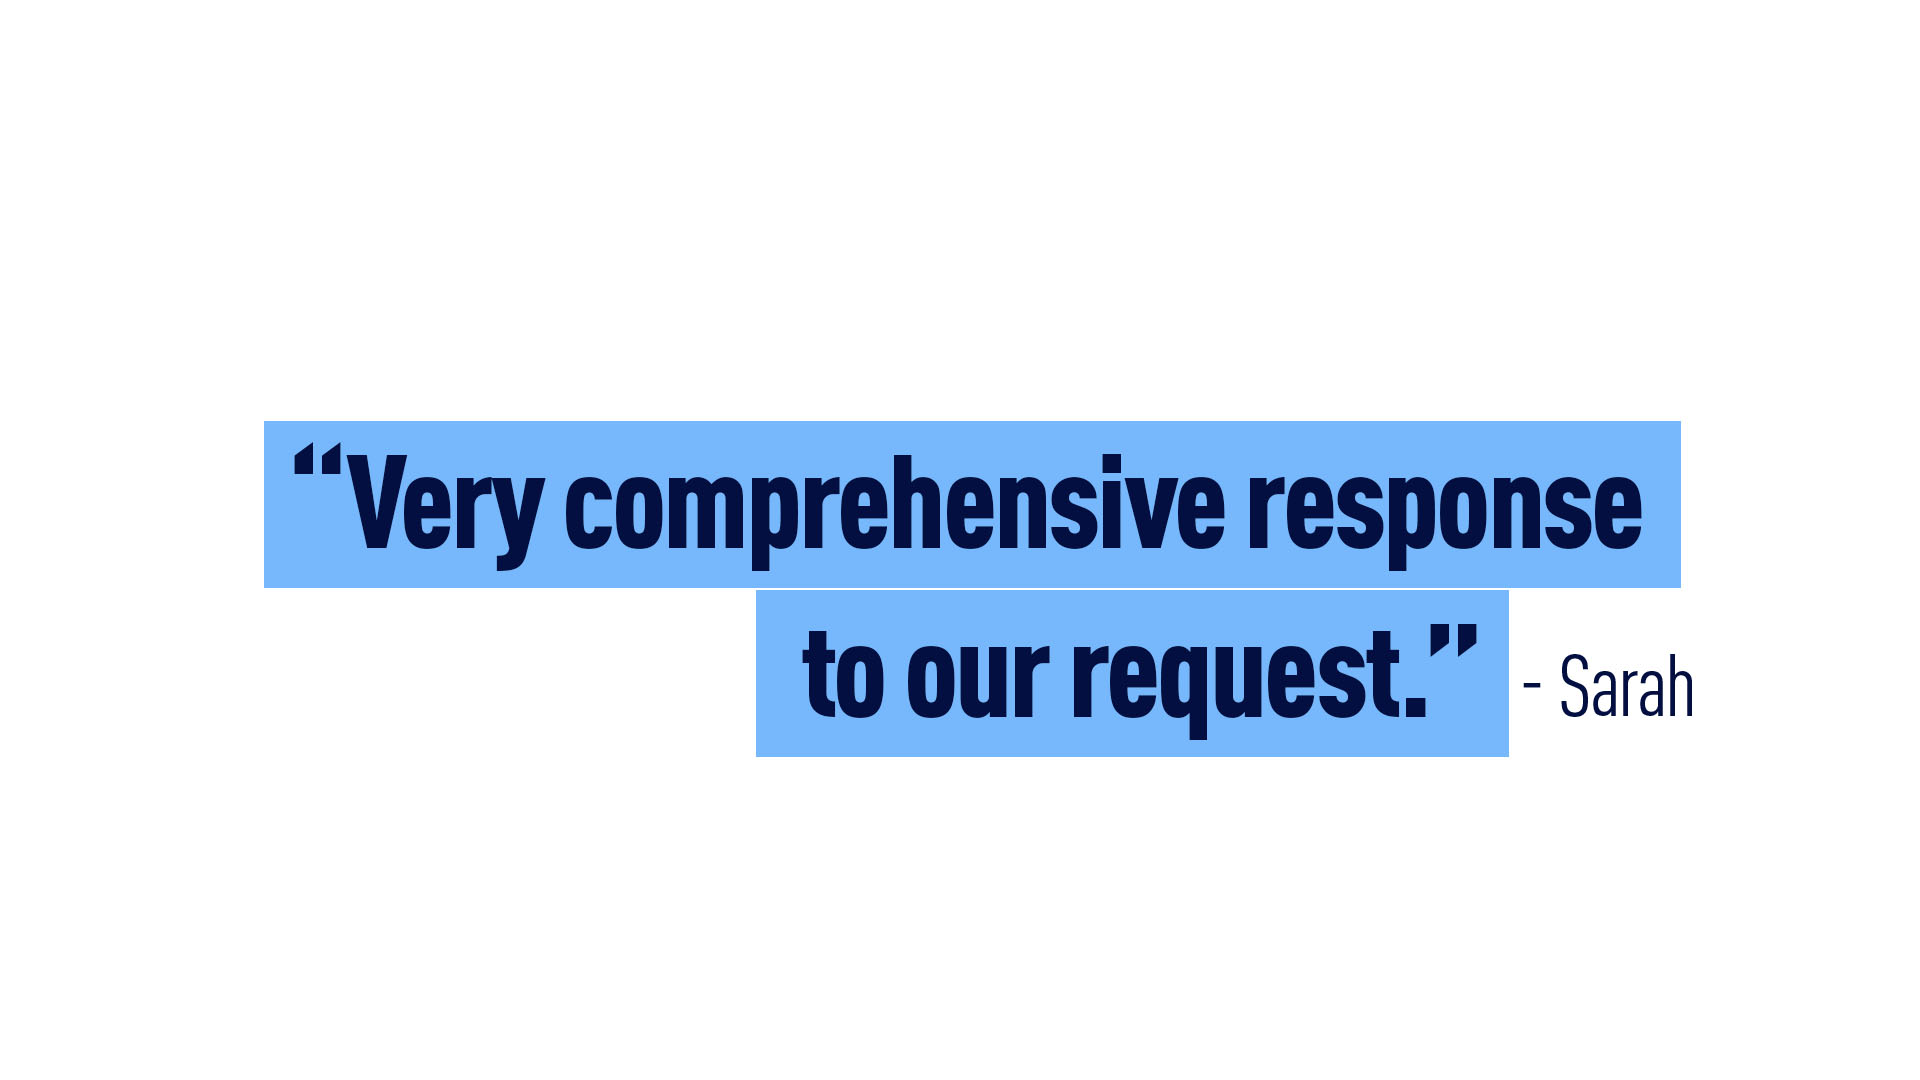 Sarah – “Very comprehensive response to our request.